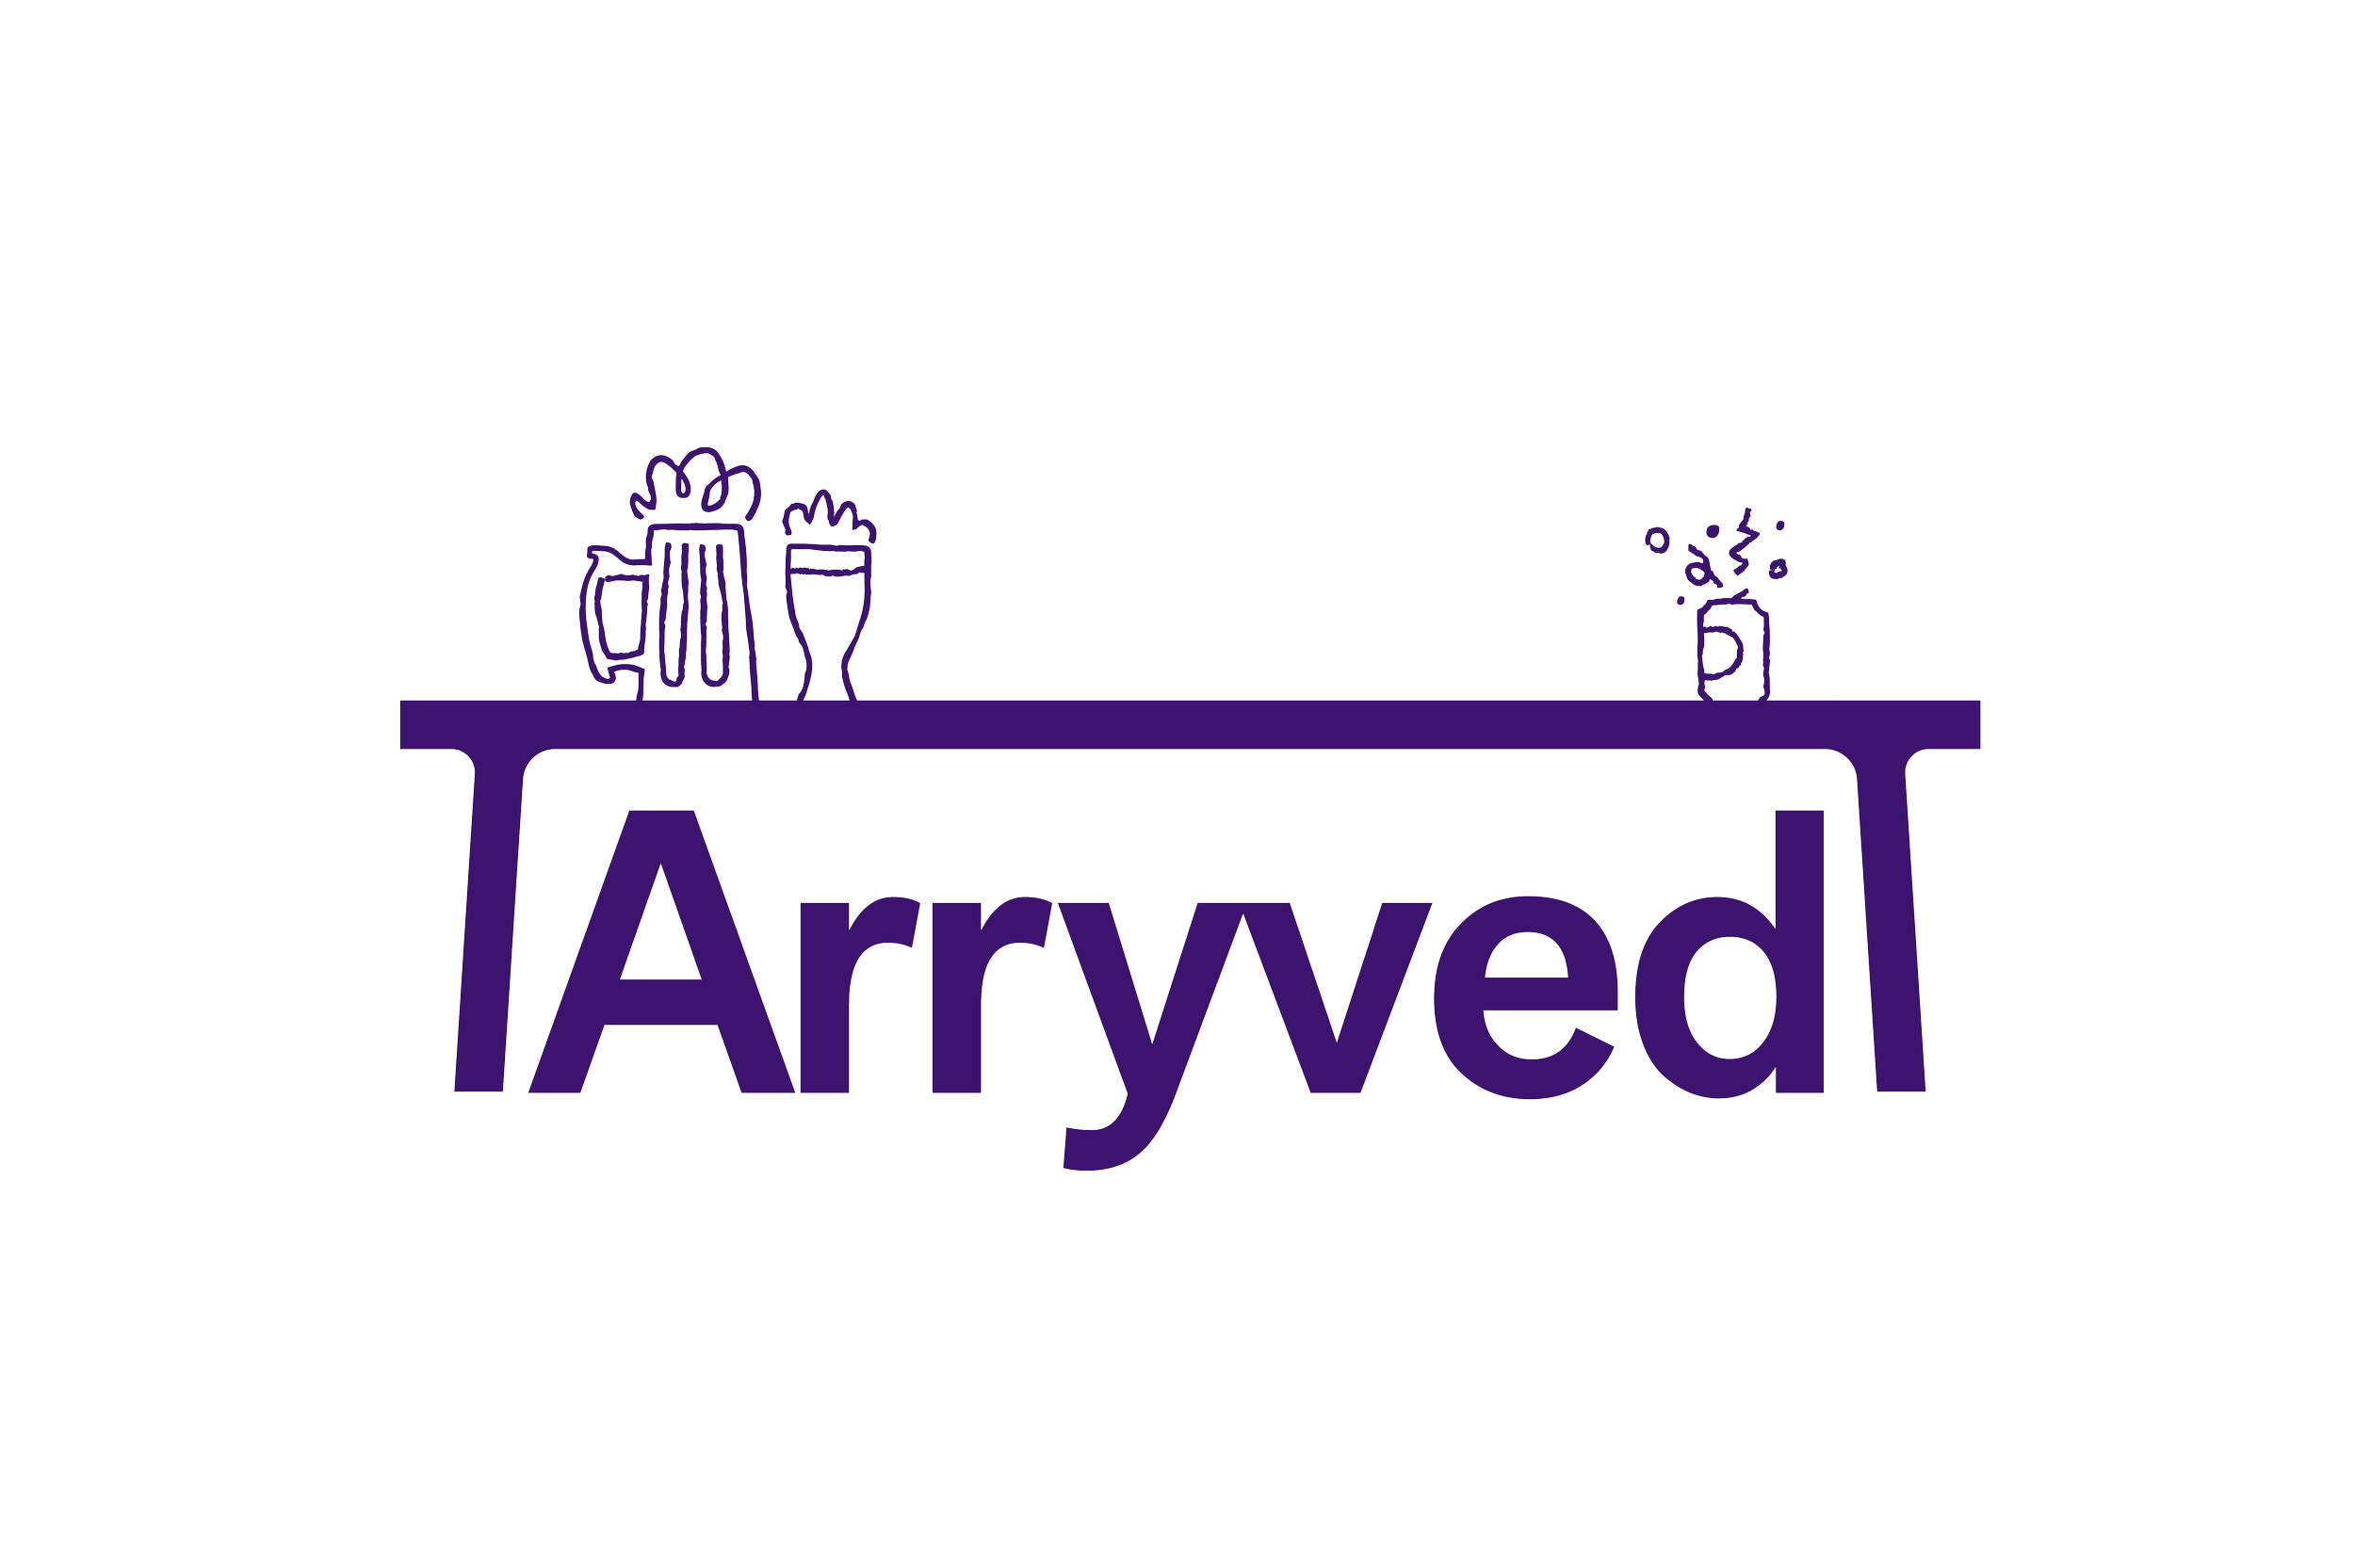  Arryved&nbsp;is Point of Sale software specializing in the craft brewing service industry. We’re a team of tech geeks with relentless passion for, and extensive experience in, the craft beverage industry as both employees and consumers. Our goal is 